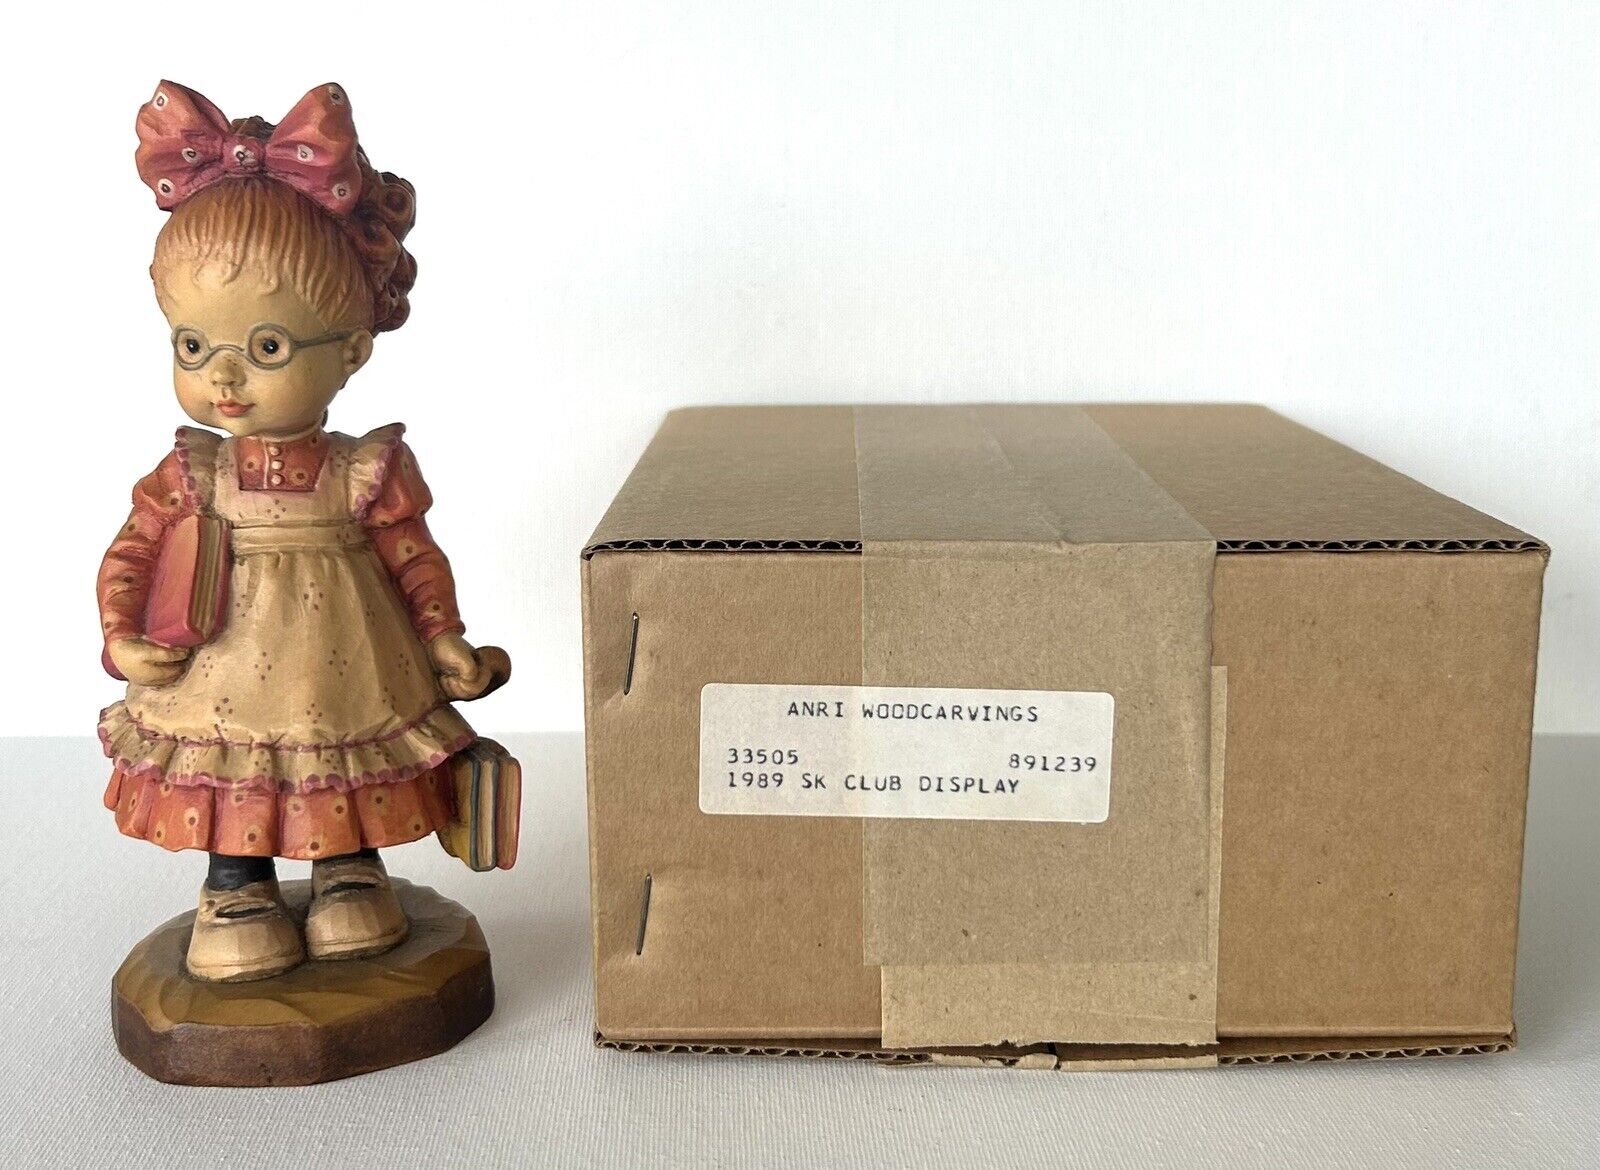 ANRI By Sarah Kay Wood Carving “OFF TO SCHOOL” Figurine 7 Inch LE 655/4000